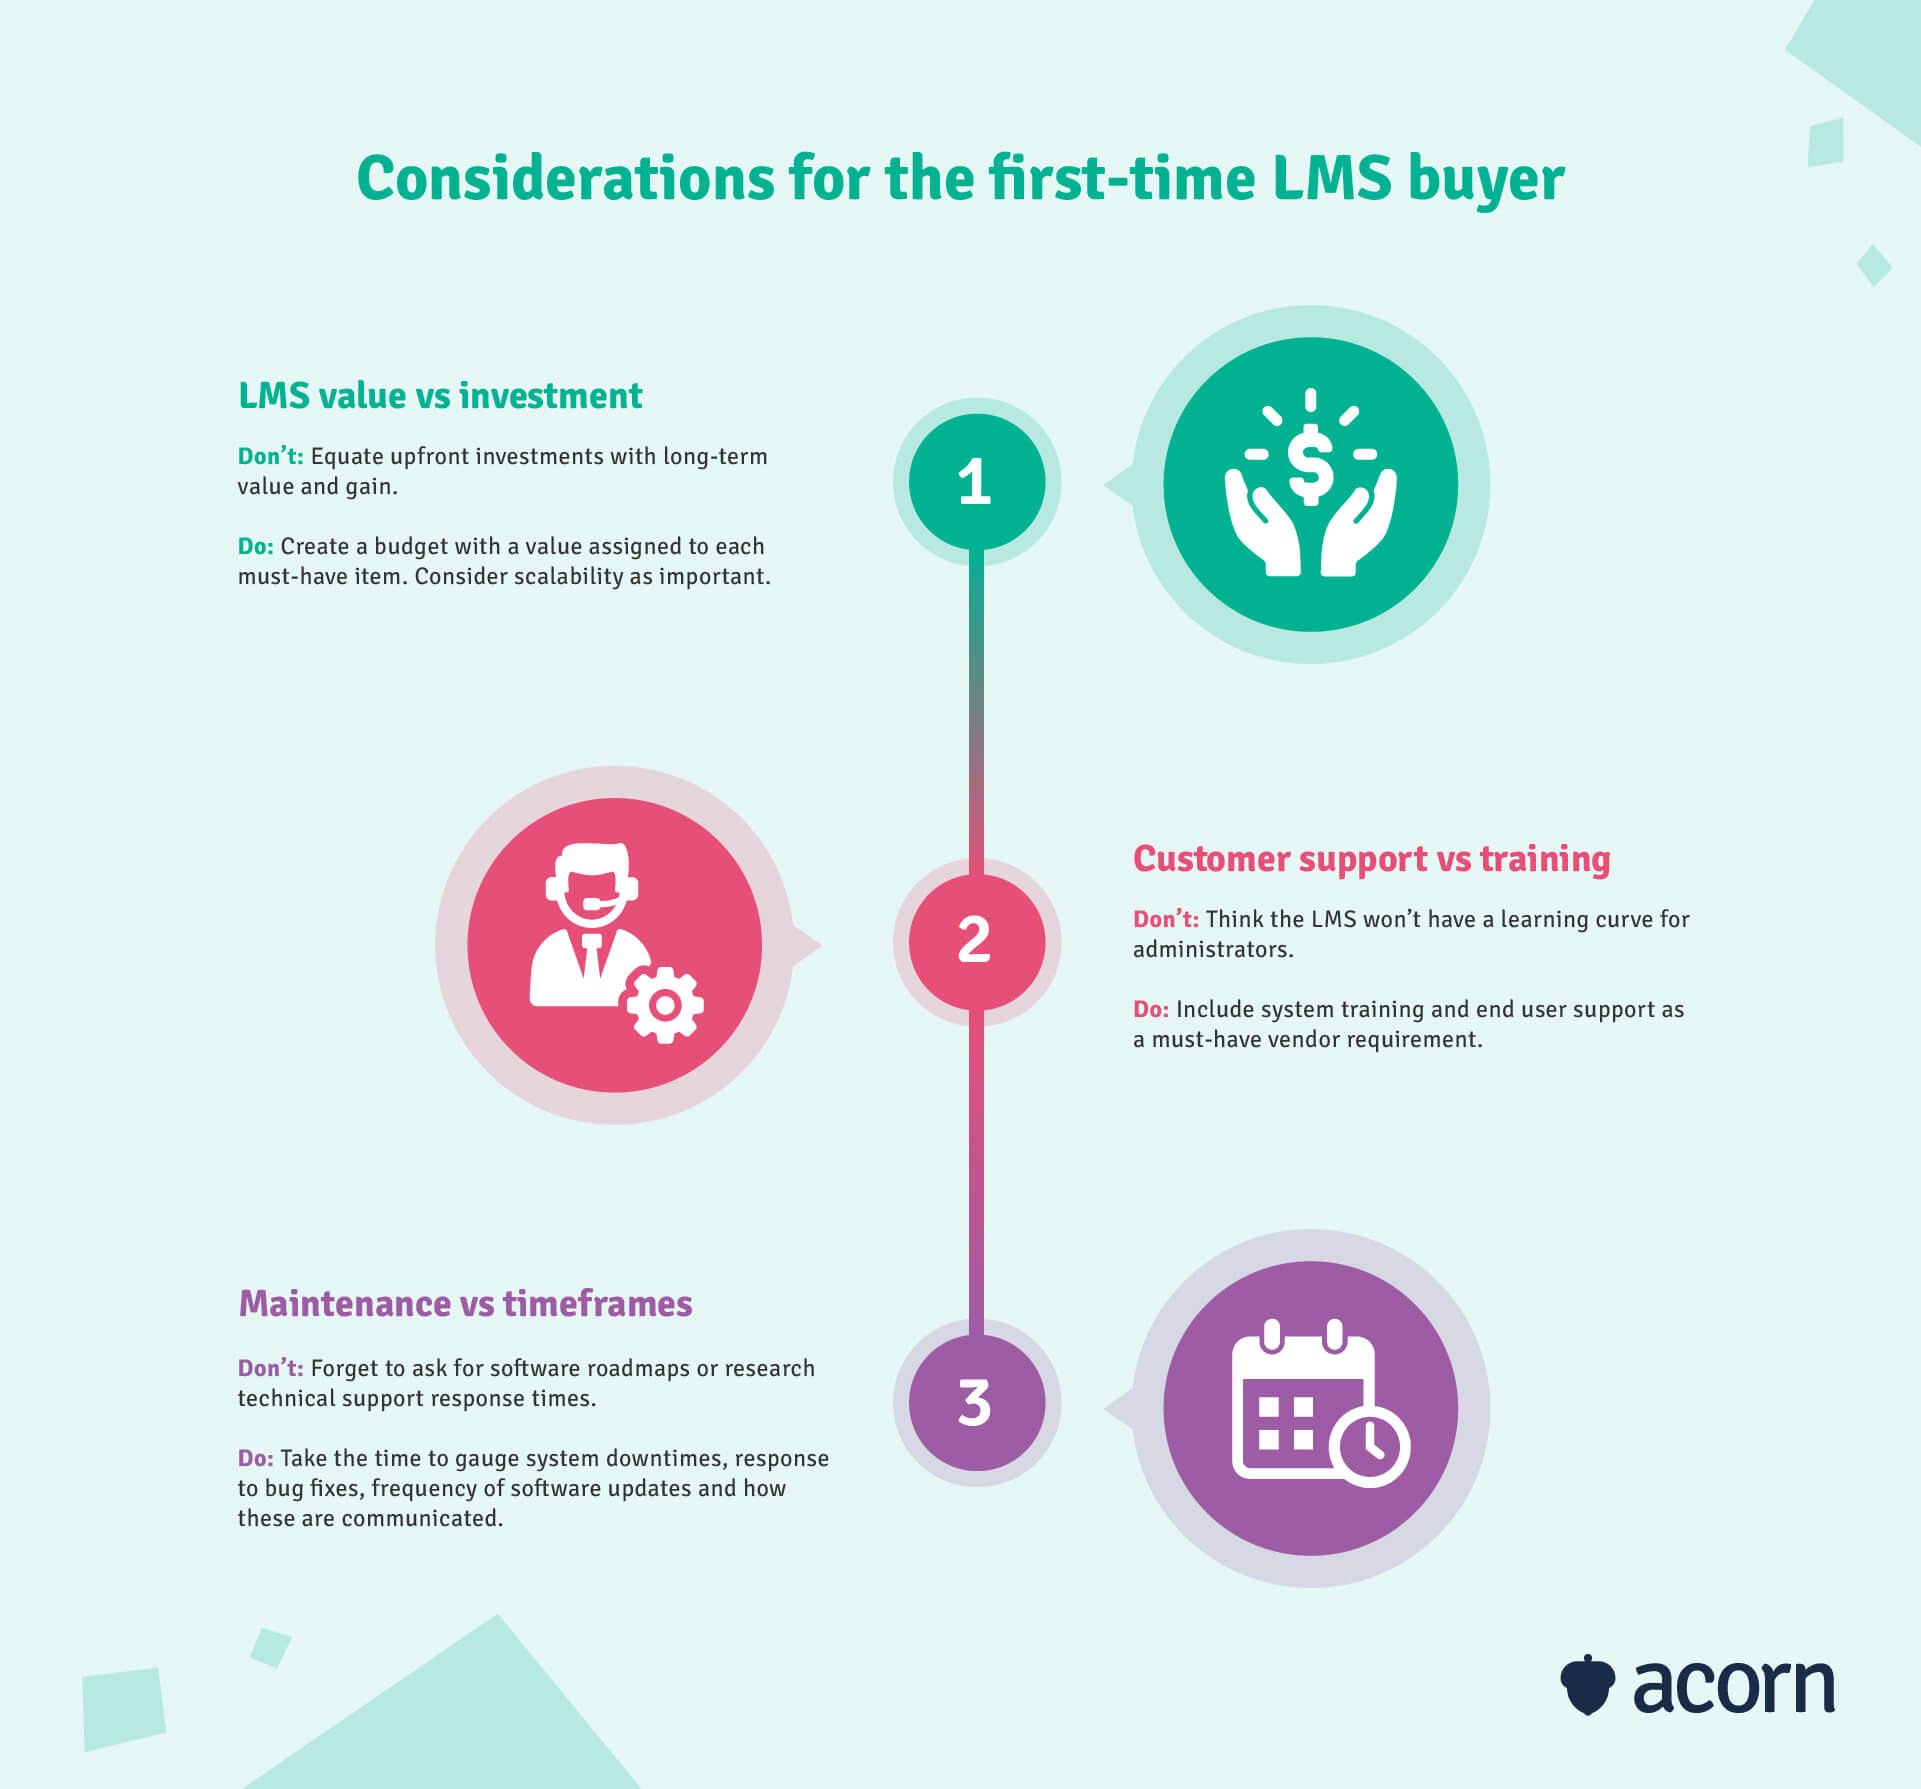 infographic showing three considerations for first time lms buyers